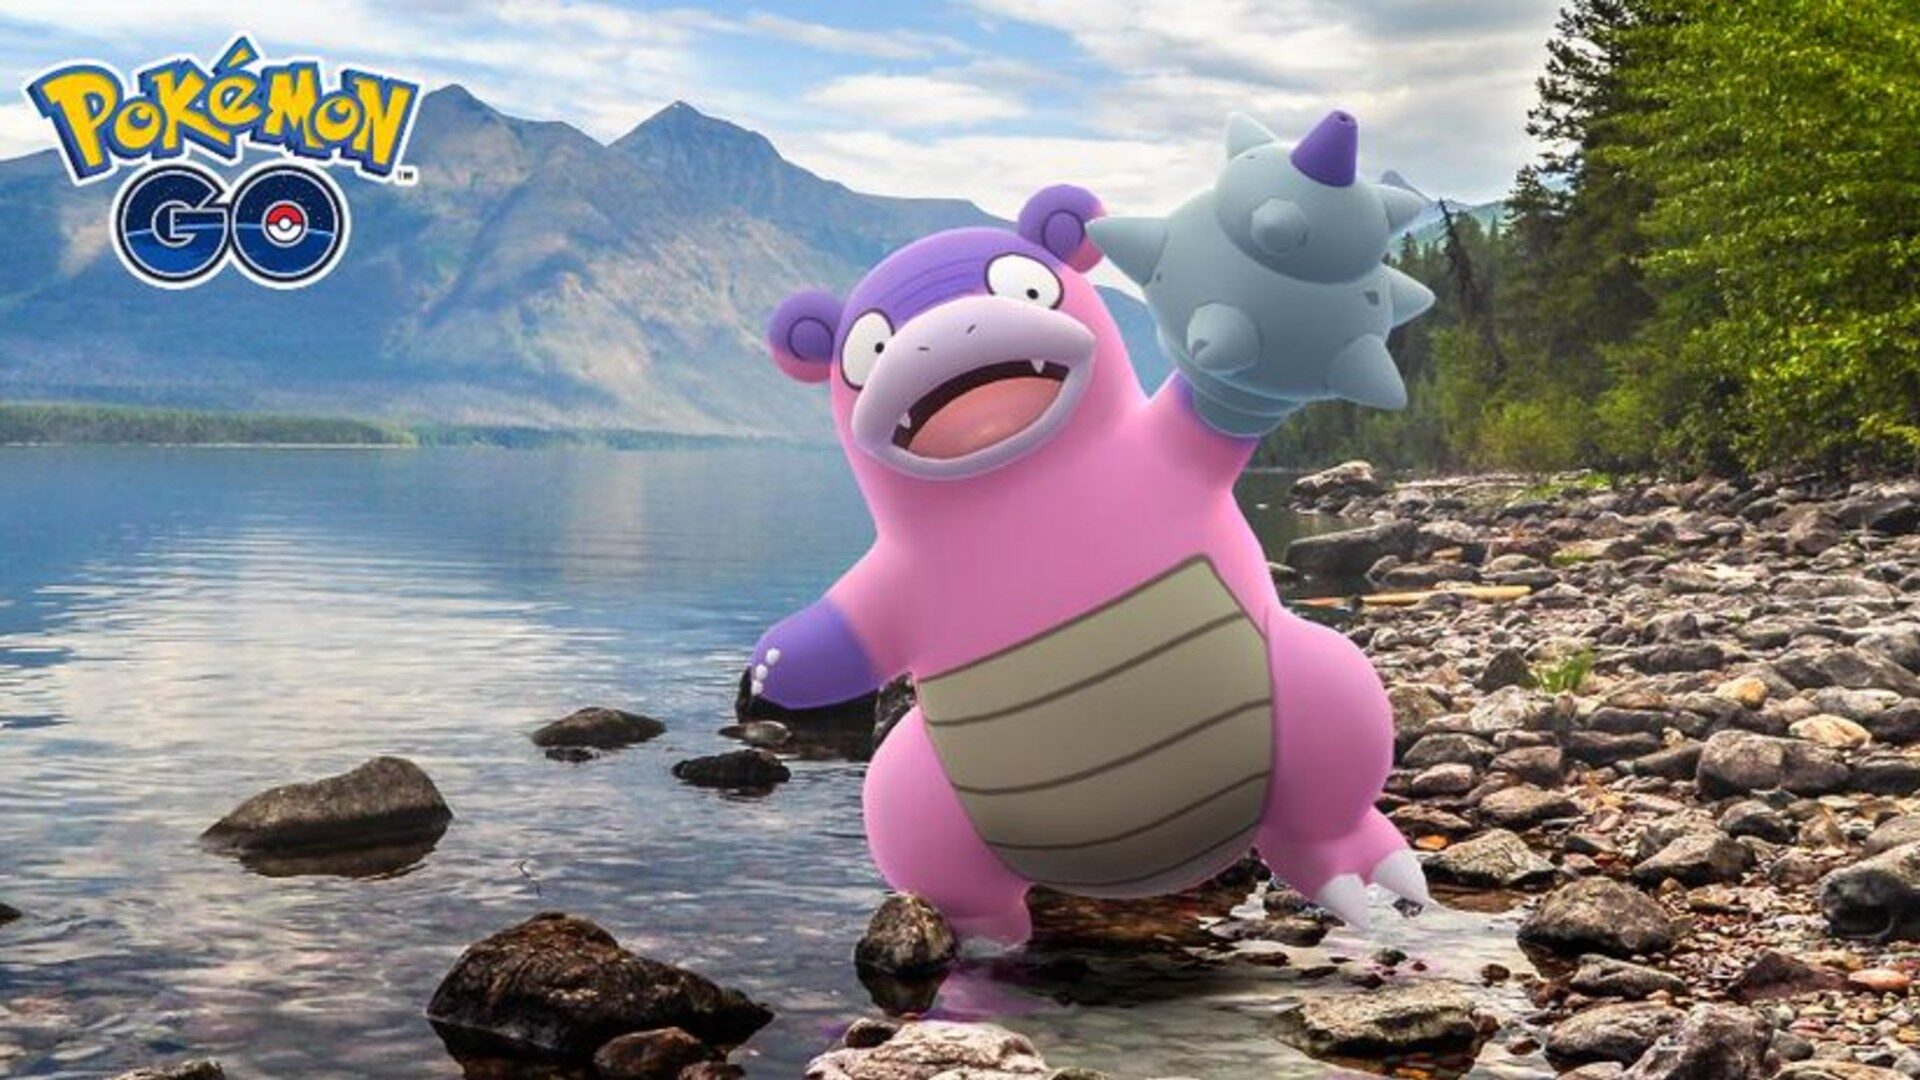 Getting Galarian Slowking in Pokémon Go is simple